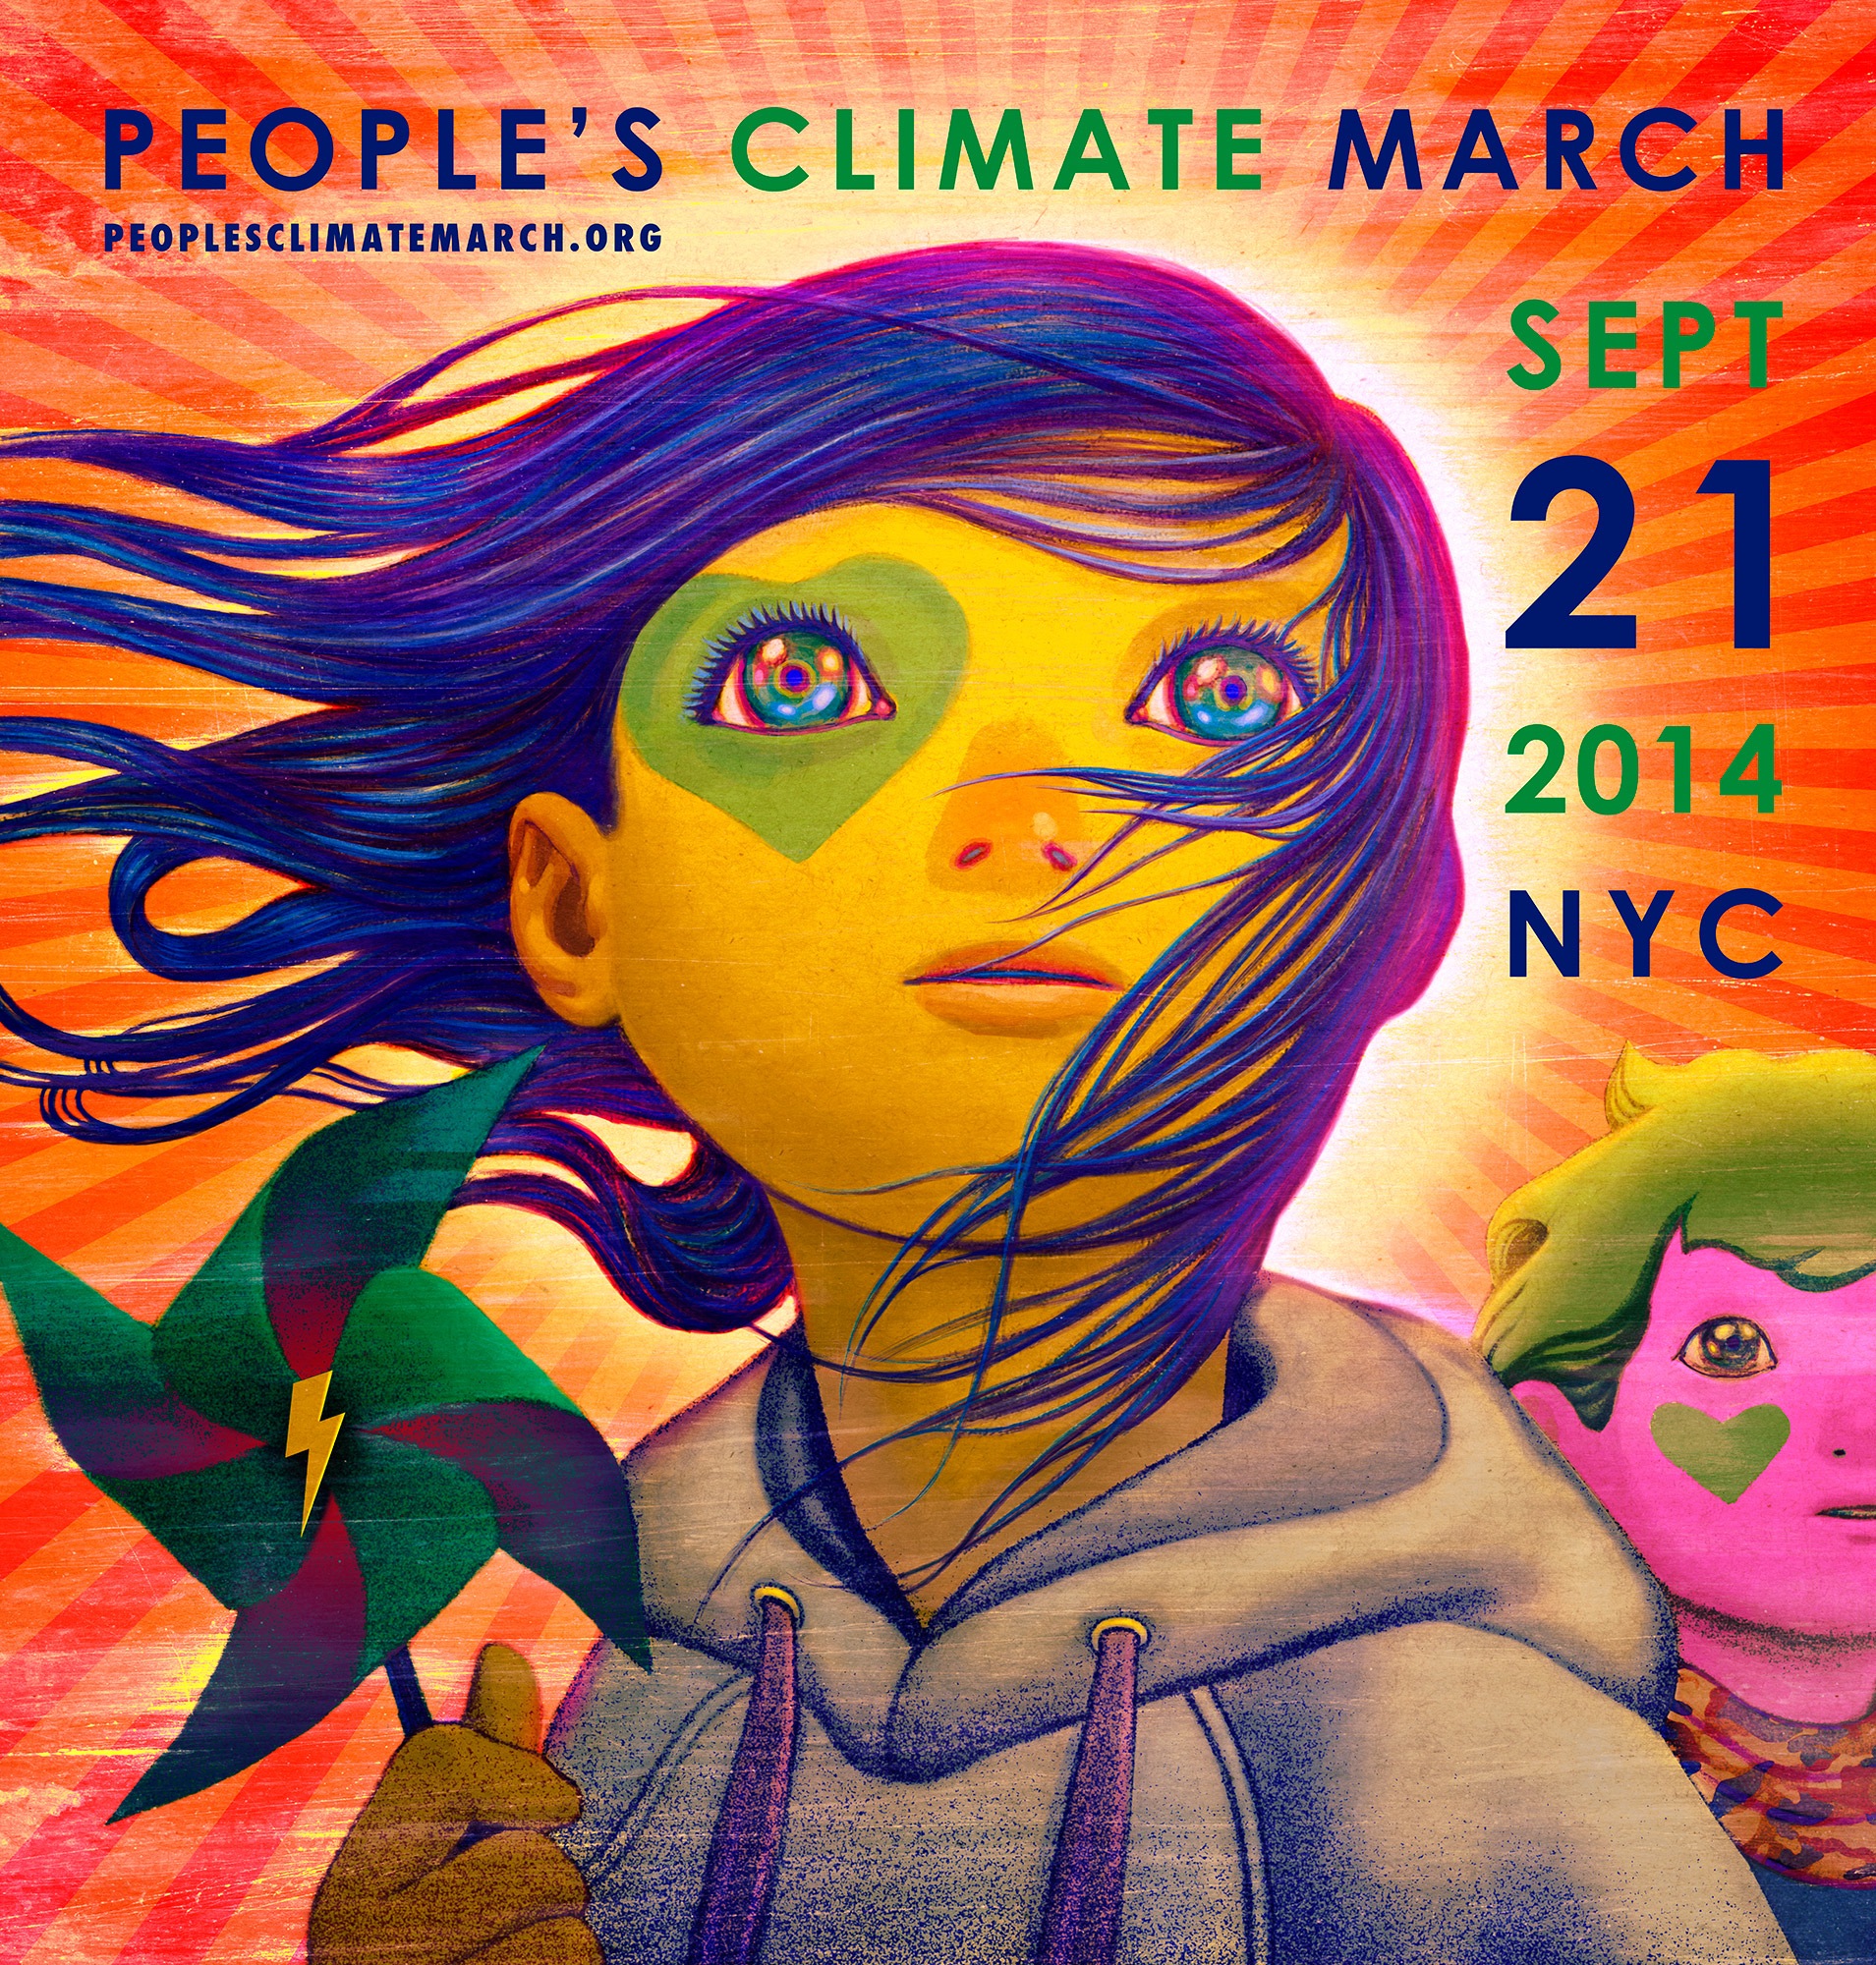 New York gets psyched for the People’s Climate March